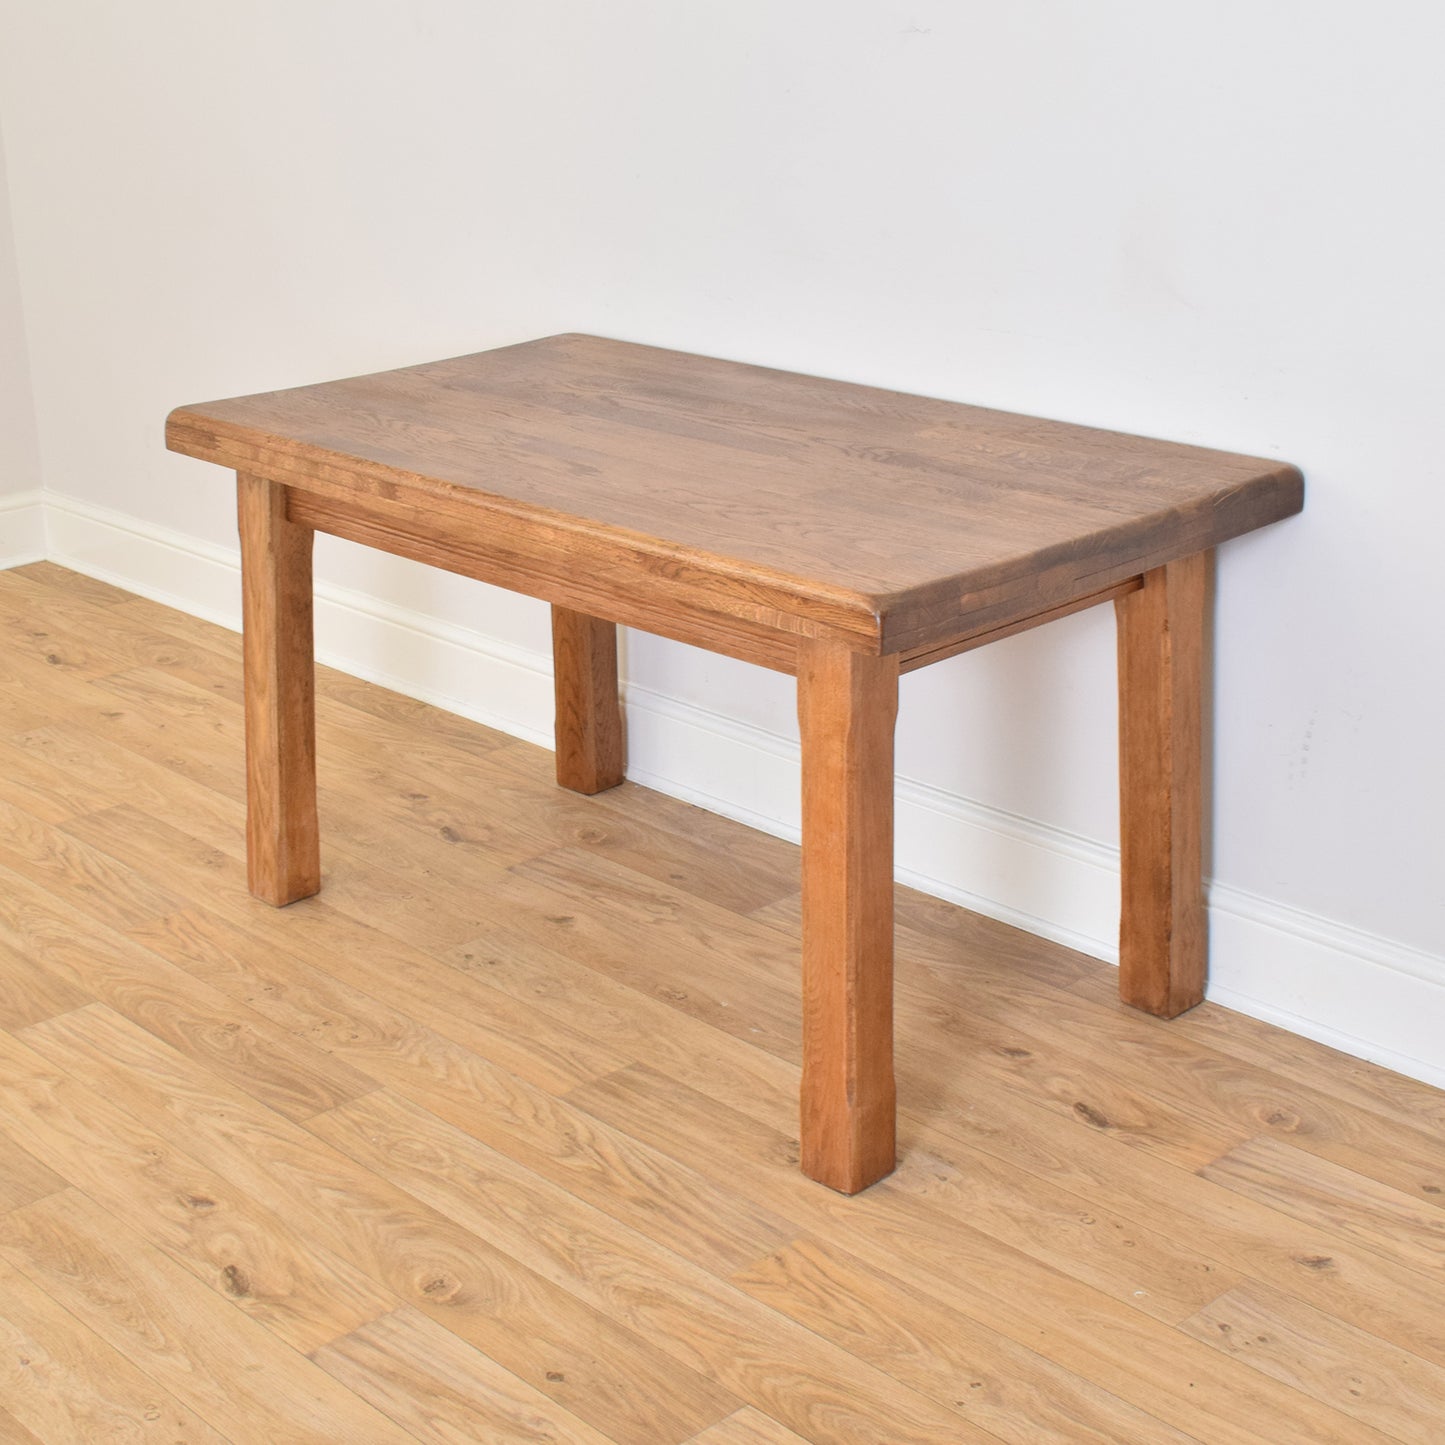 Oak Table And Four Chairs